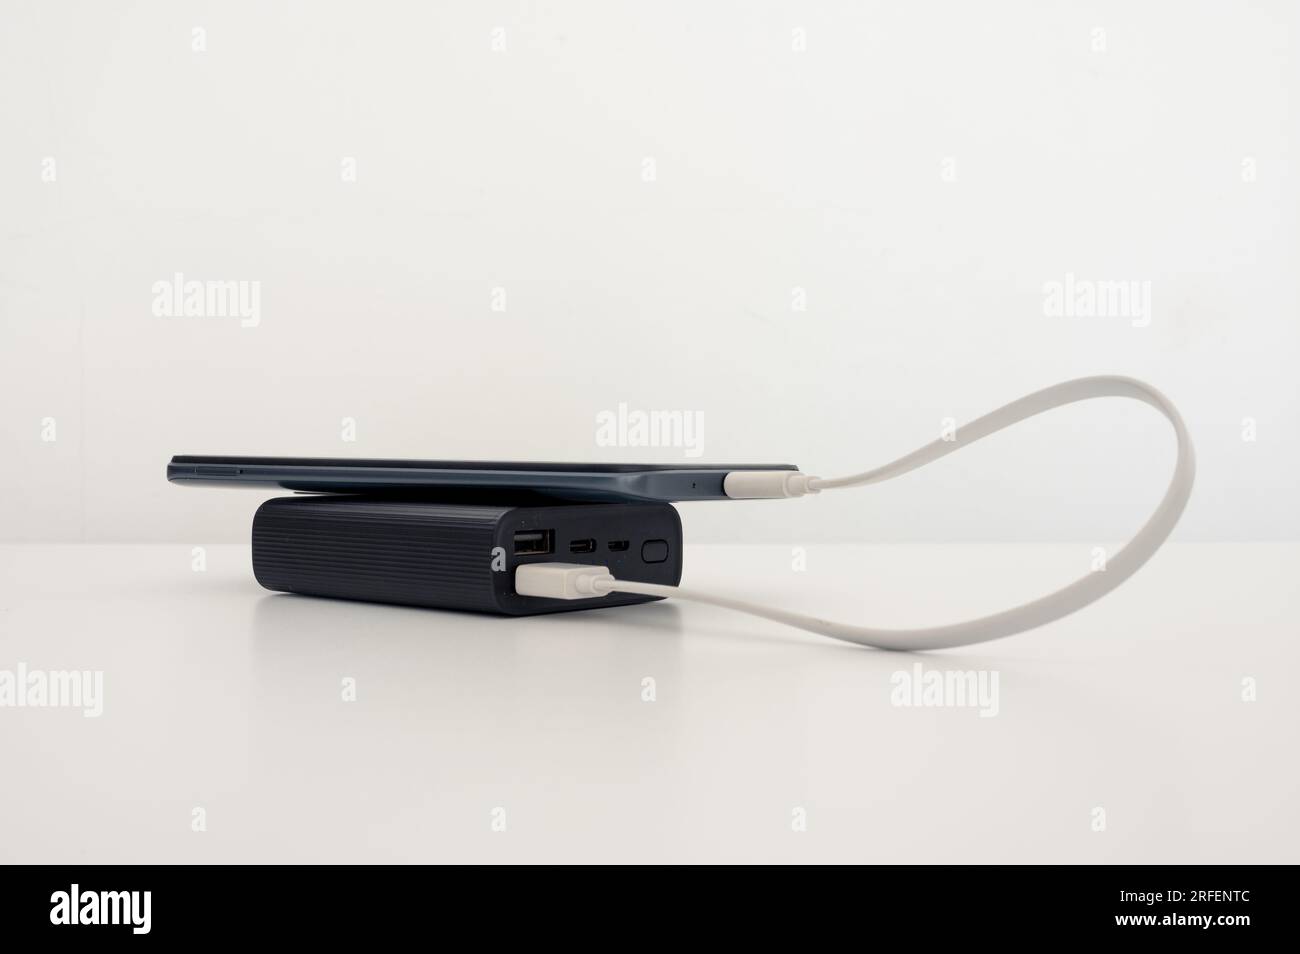 Mobile phone charging from black power bank on the table. White background. Stock Photo